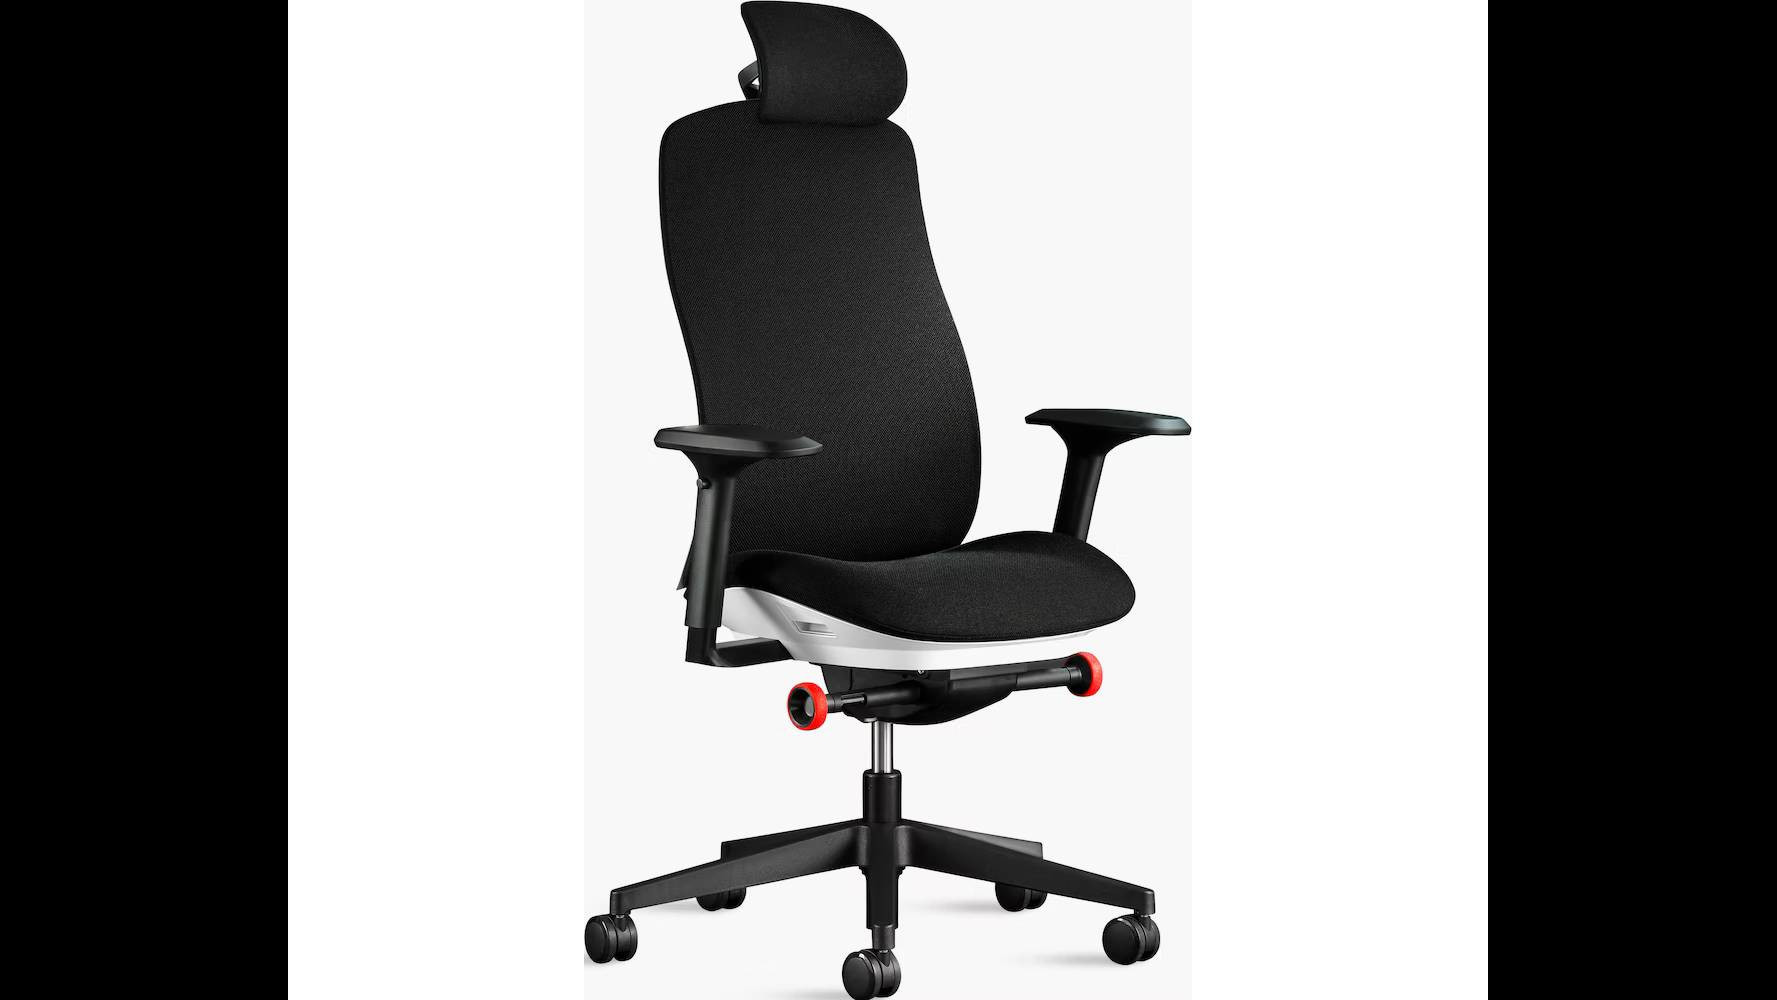 Herman Miller Aeron: The Best Ergonomic Chair For Office Work Now On Sale